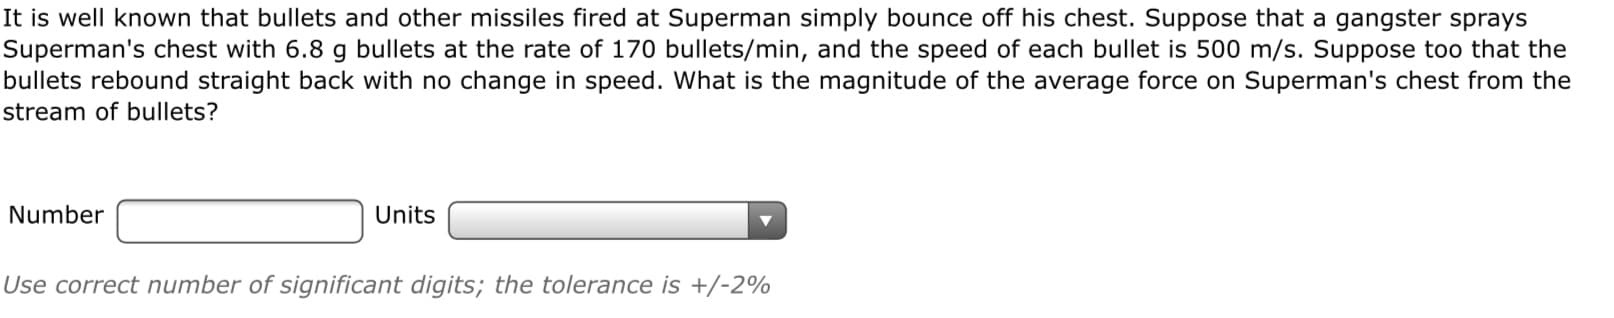 It is well known that bullets and other missiles fired at Superman simply bounce off his chest. Suppose that a gangster sprays
Superman's chest with 6.8 g bullets at the rate of 170 bullets/min, and the speed of each bullet is 500 m/s. Suppose too that the
bullets rebound straight back with no change in speed. What is the magnitude of the average force on Superman's chest from the
stream of bullets?
Number
Units
Use correct number of significant digits; the tolerance is +/-2%
